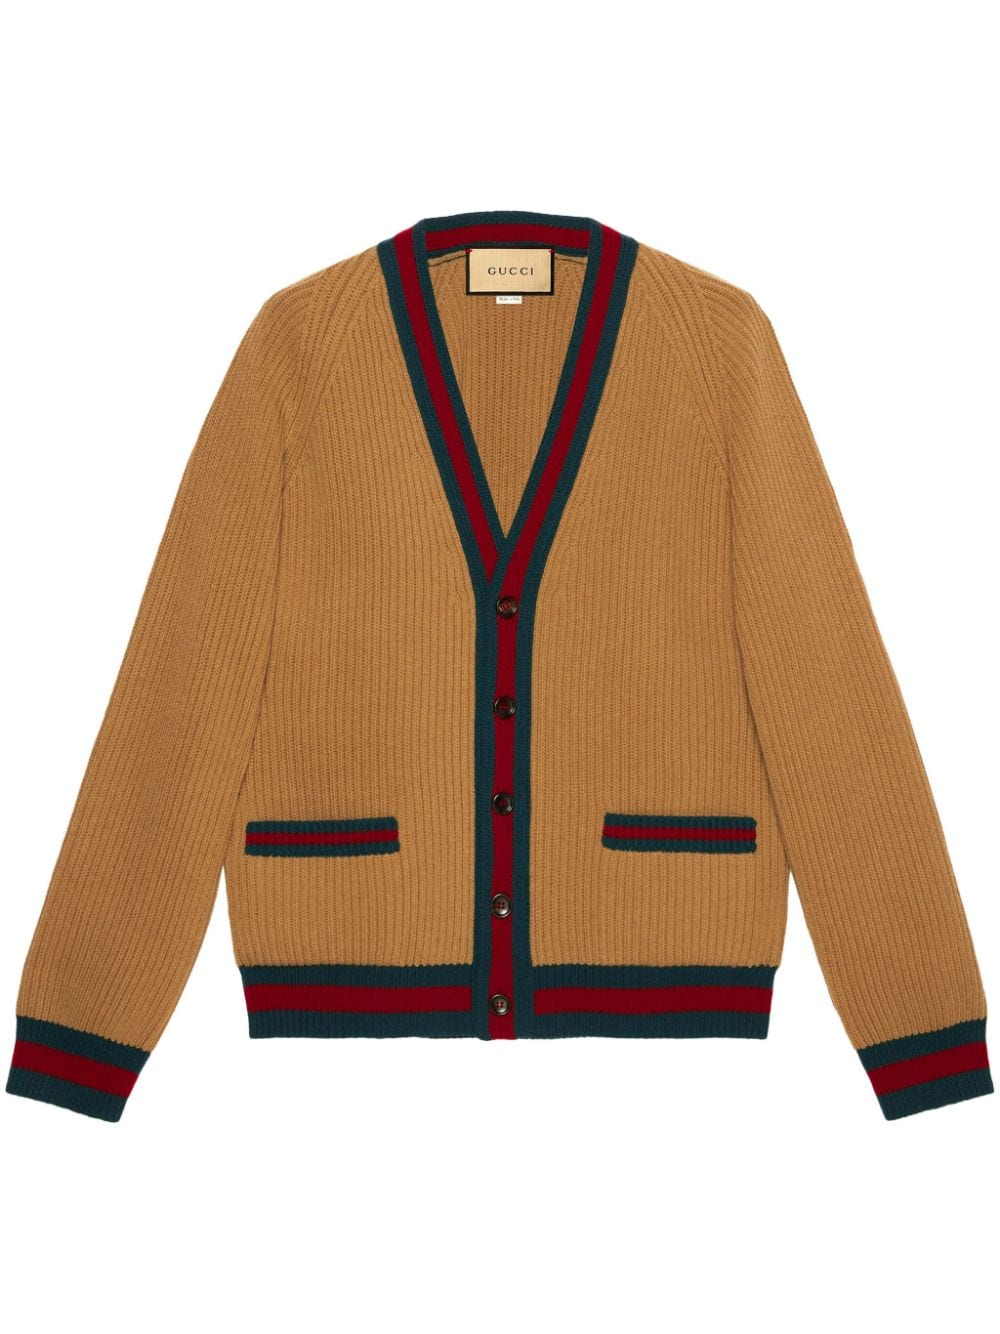 GUCCI Men's Beige Wool Cardigan with Front Pockets and Web Detail